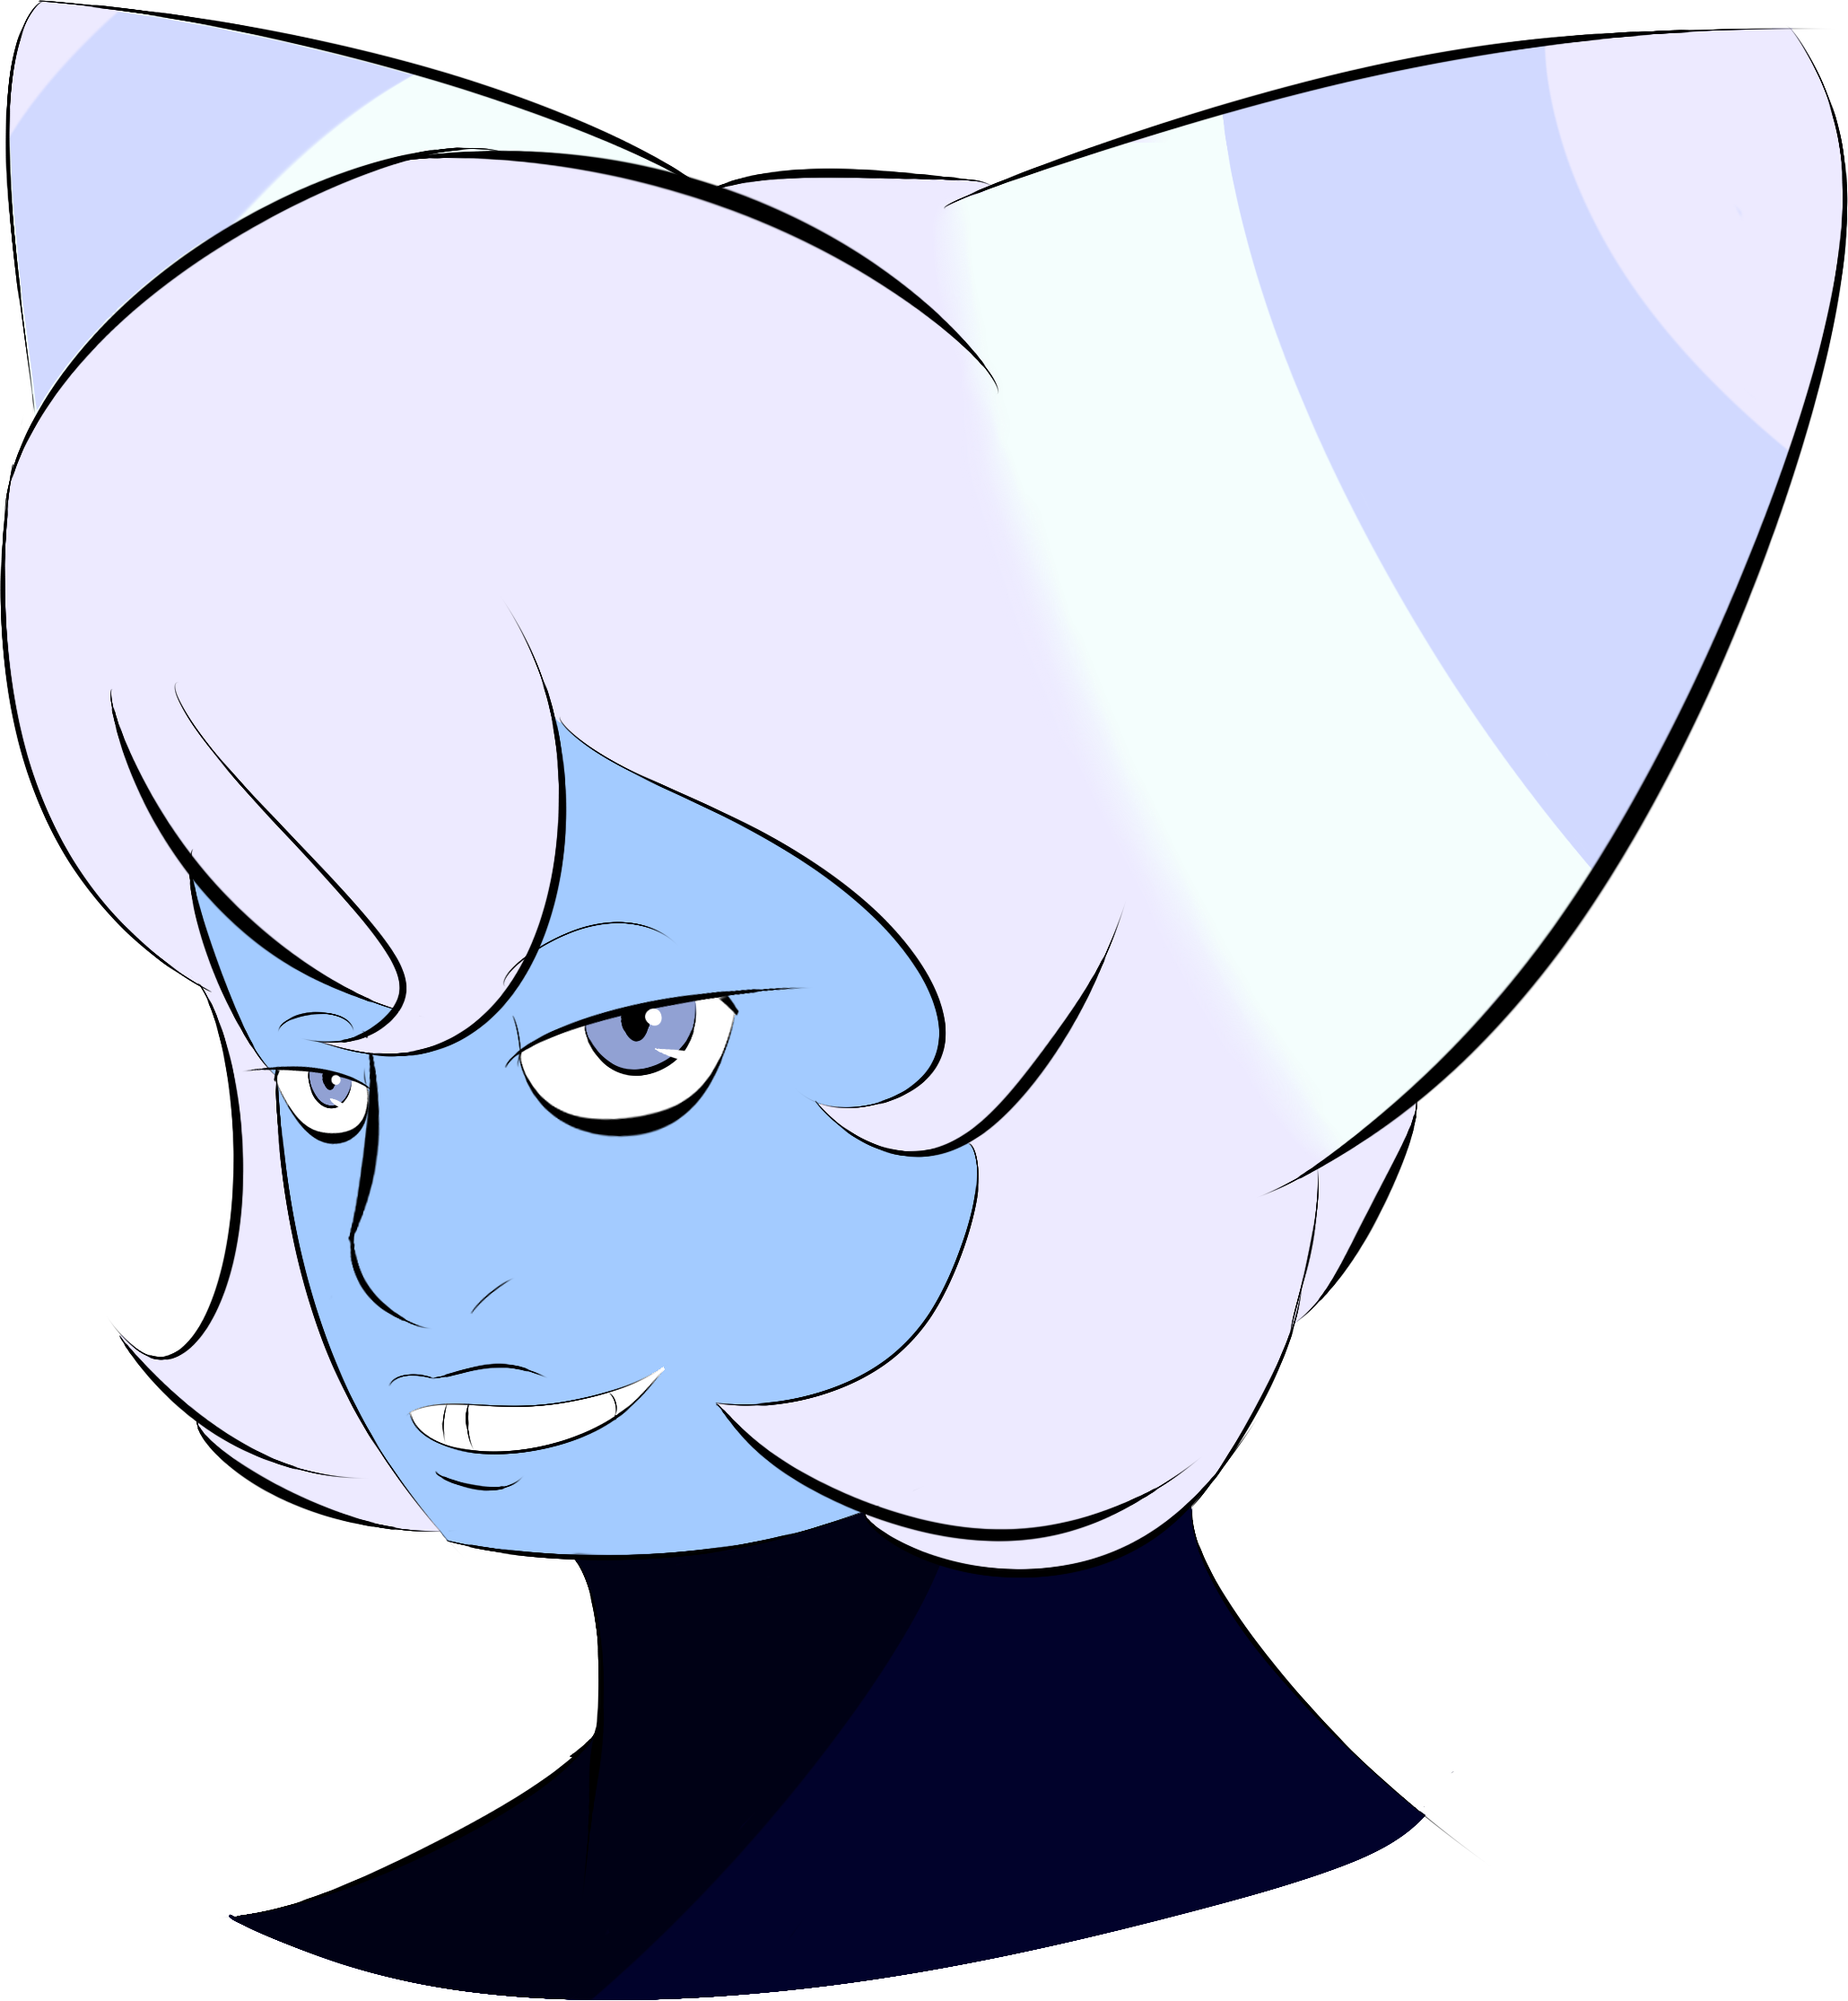 holly_sassy_by_blue_arctic-db0xscc.png